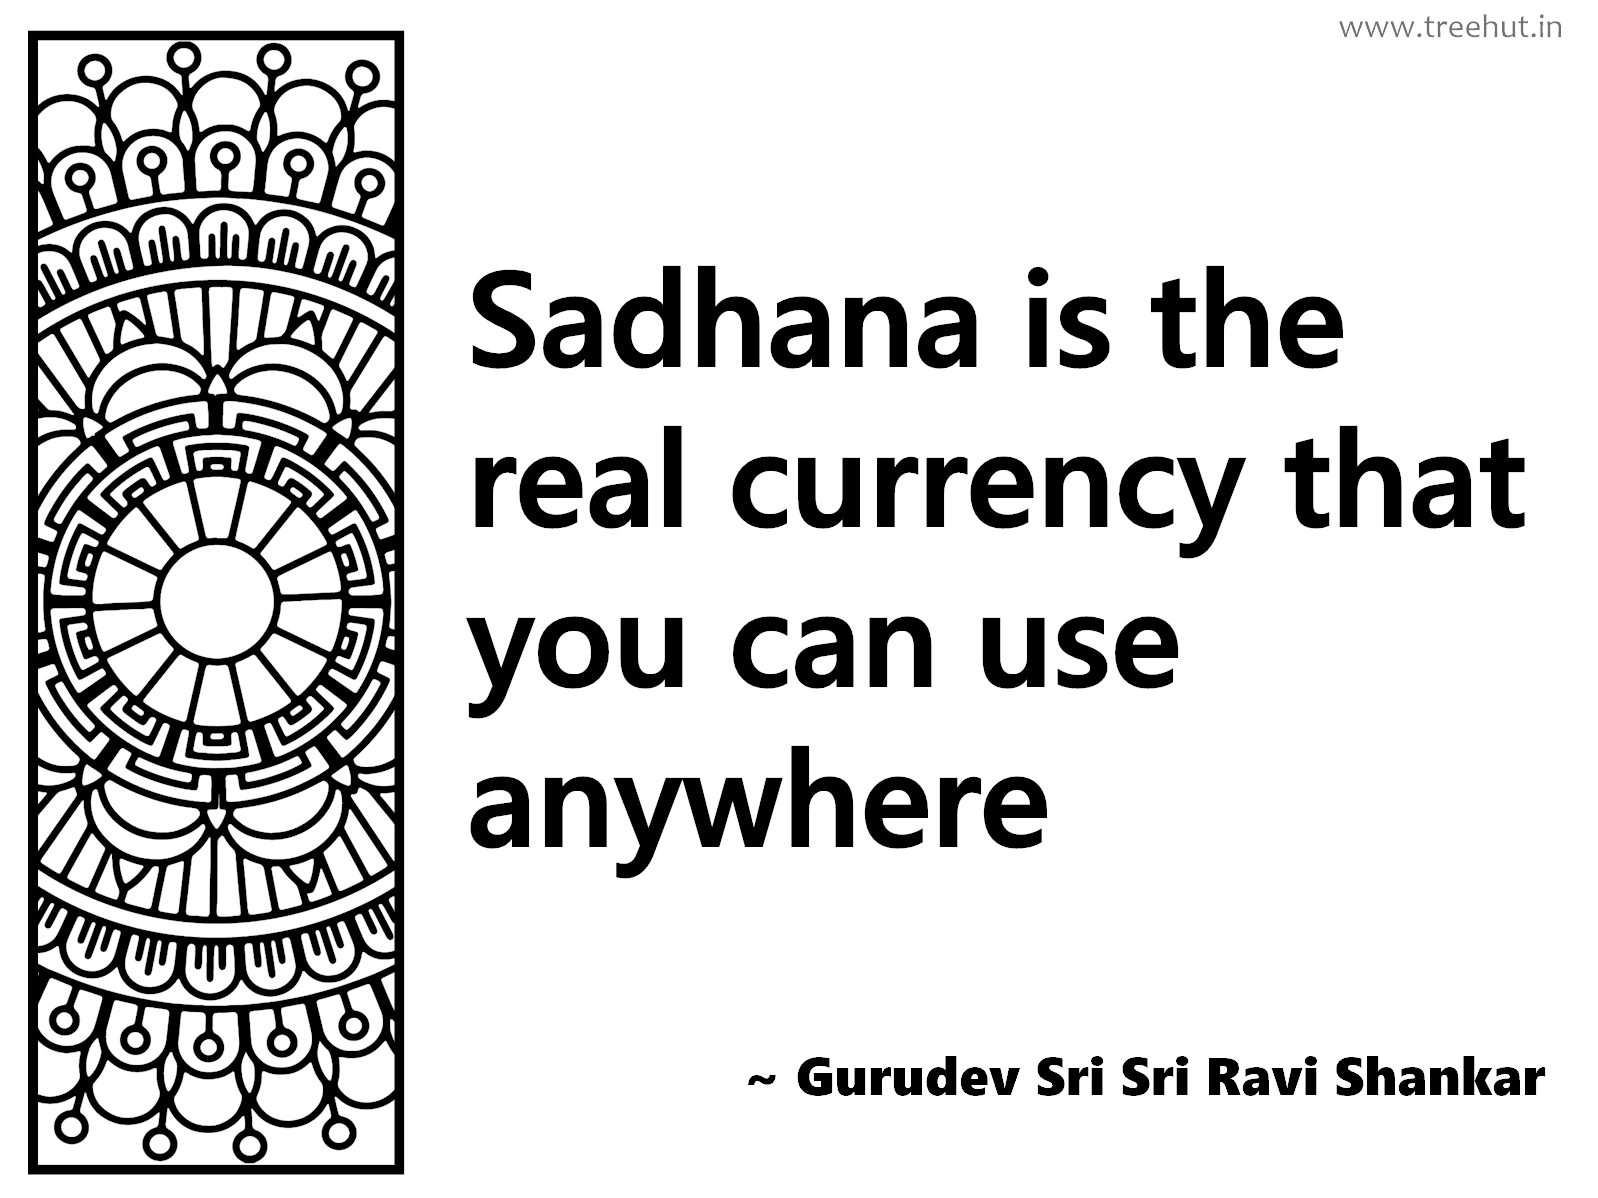 Sadhana is the real currency that you can use anywhere Inspirational Quote by Gurudev Sri Sri Ravi Shankar, coloring pages